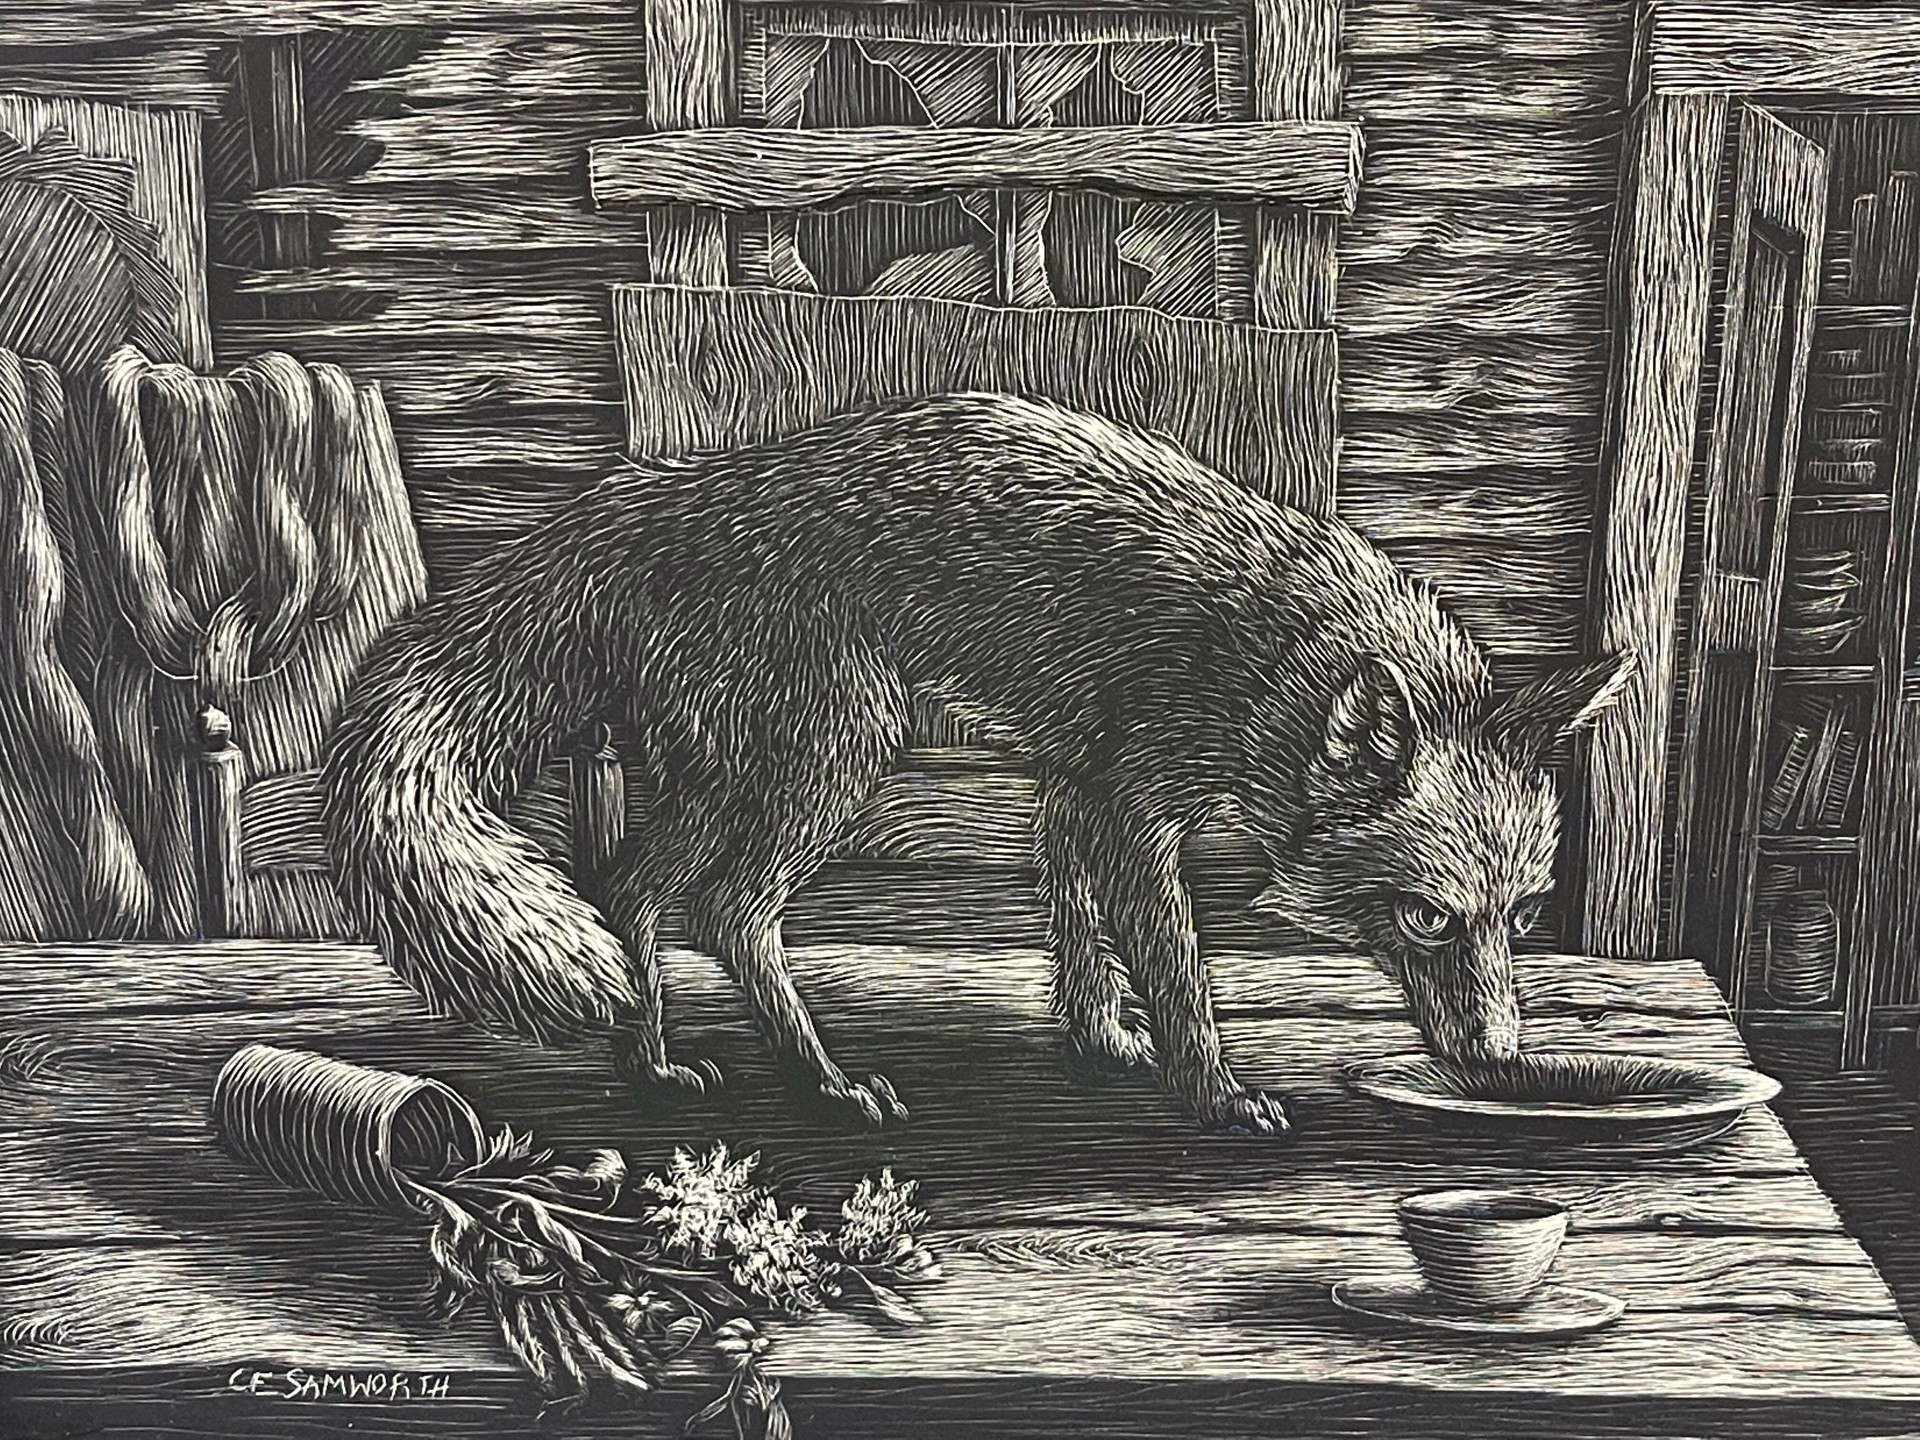 Untitled (Fox on Table) by Kate Samworth